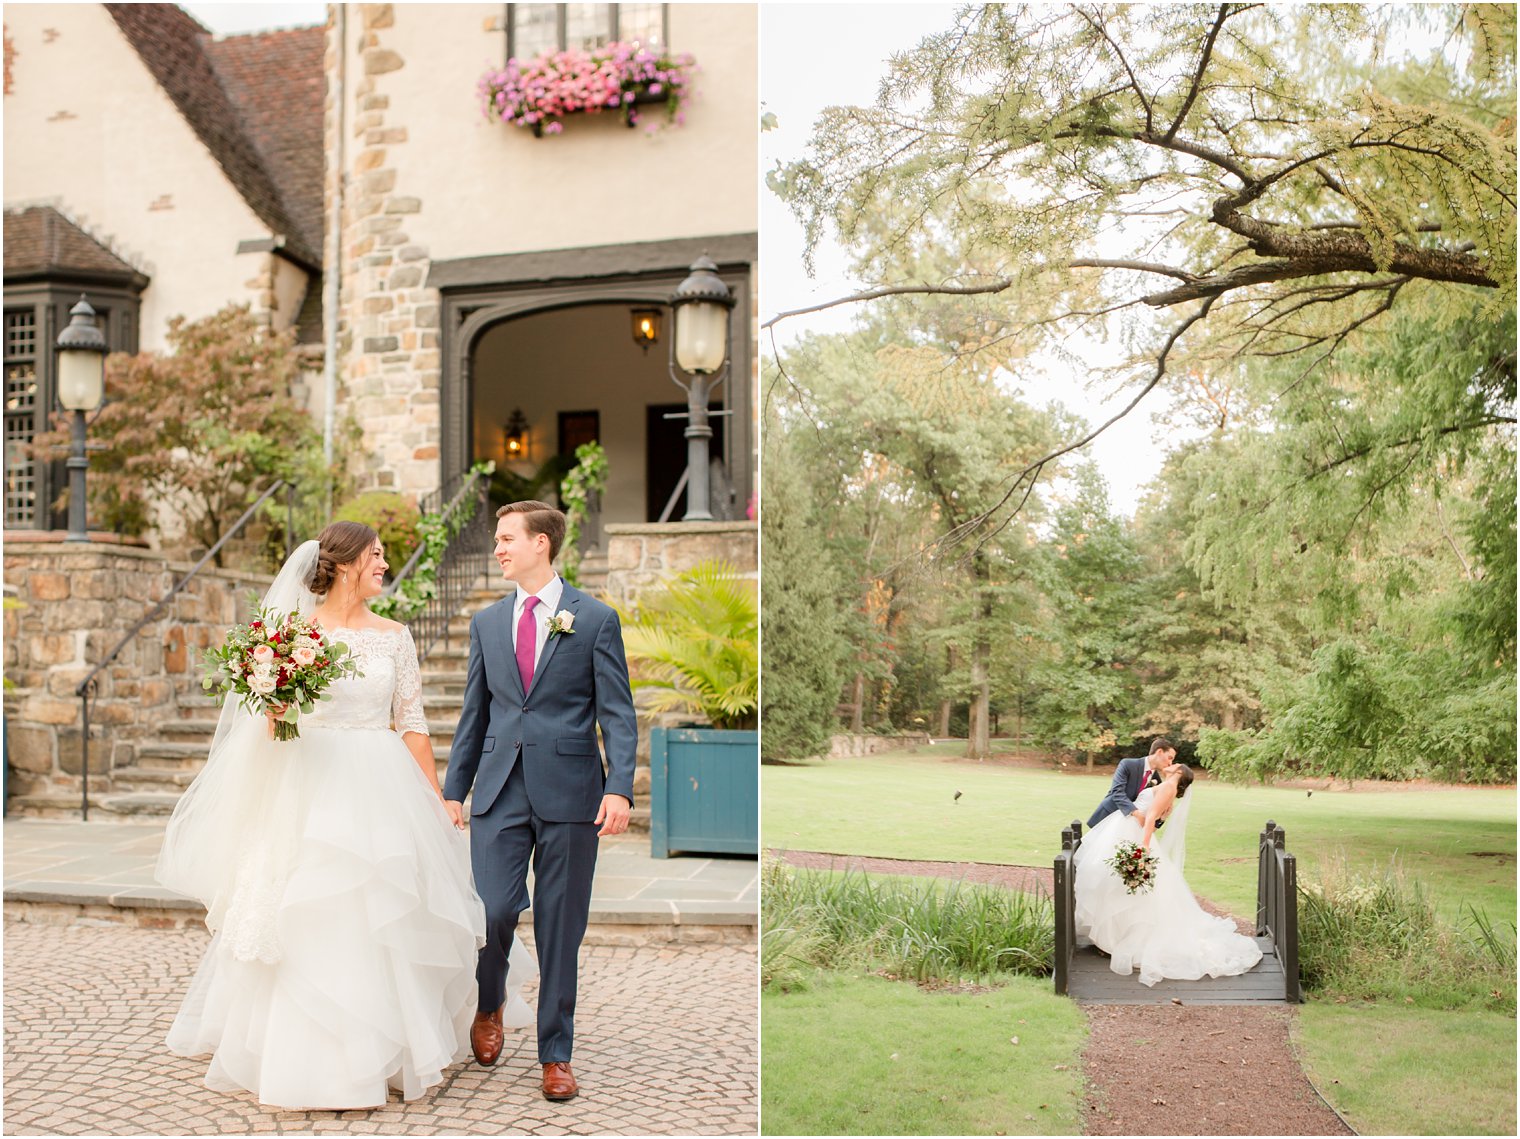 Candid bride and groom photos at Pleasantdale Chateau